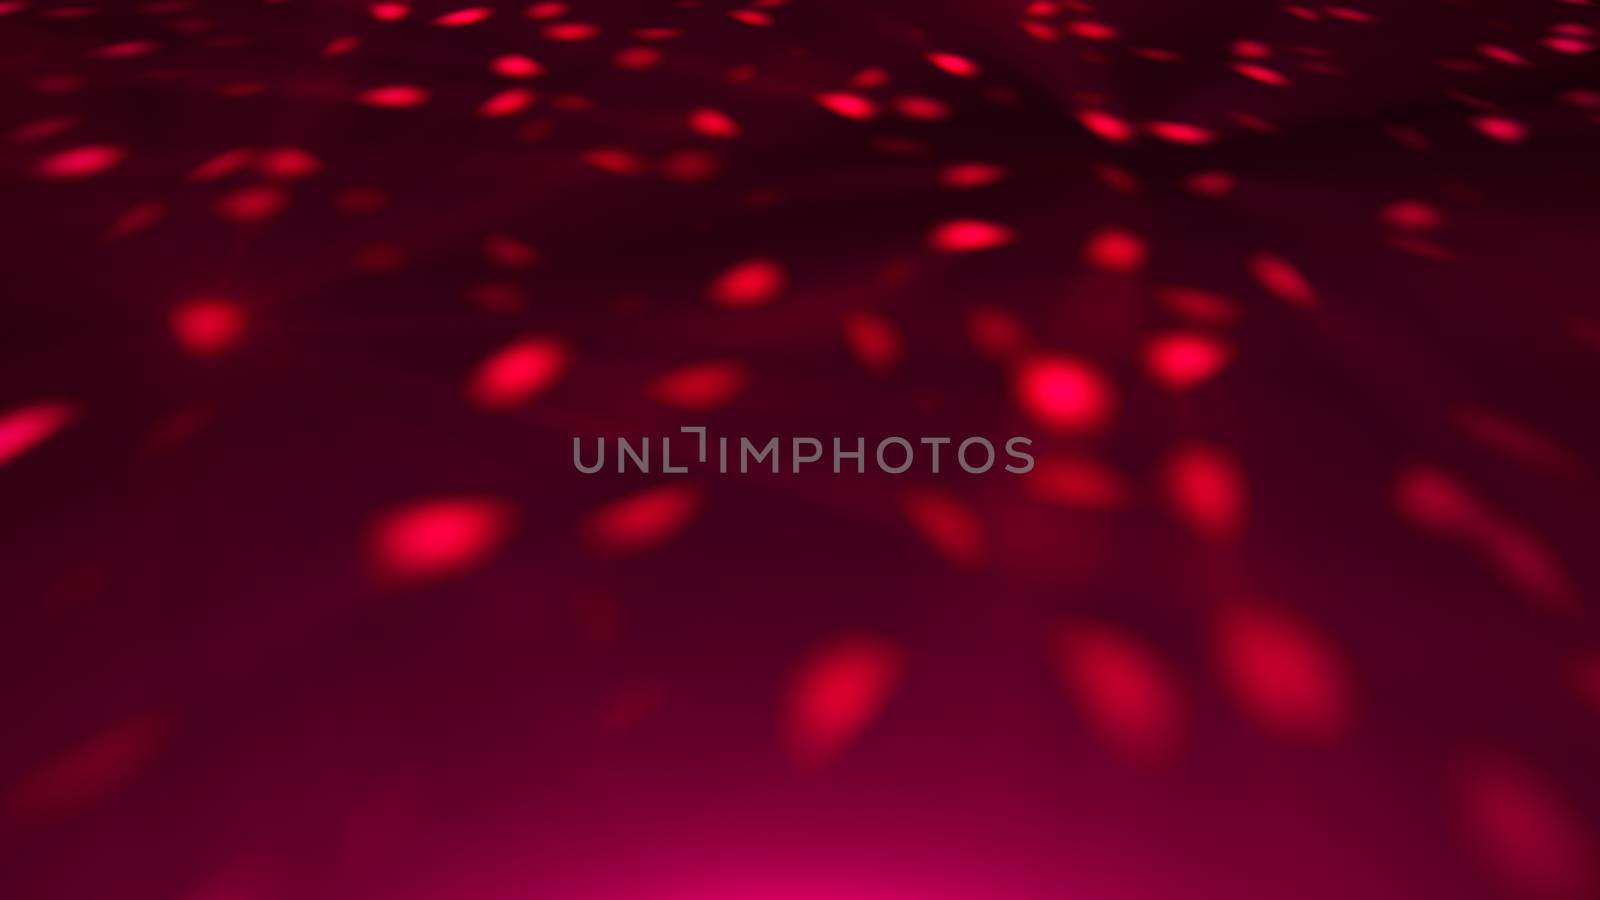 Abstract background with disco dance floor. Digital illustration. 3d rendering